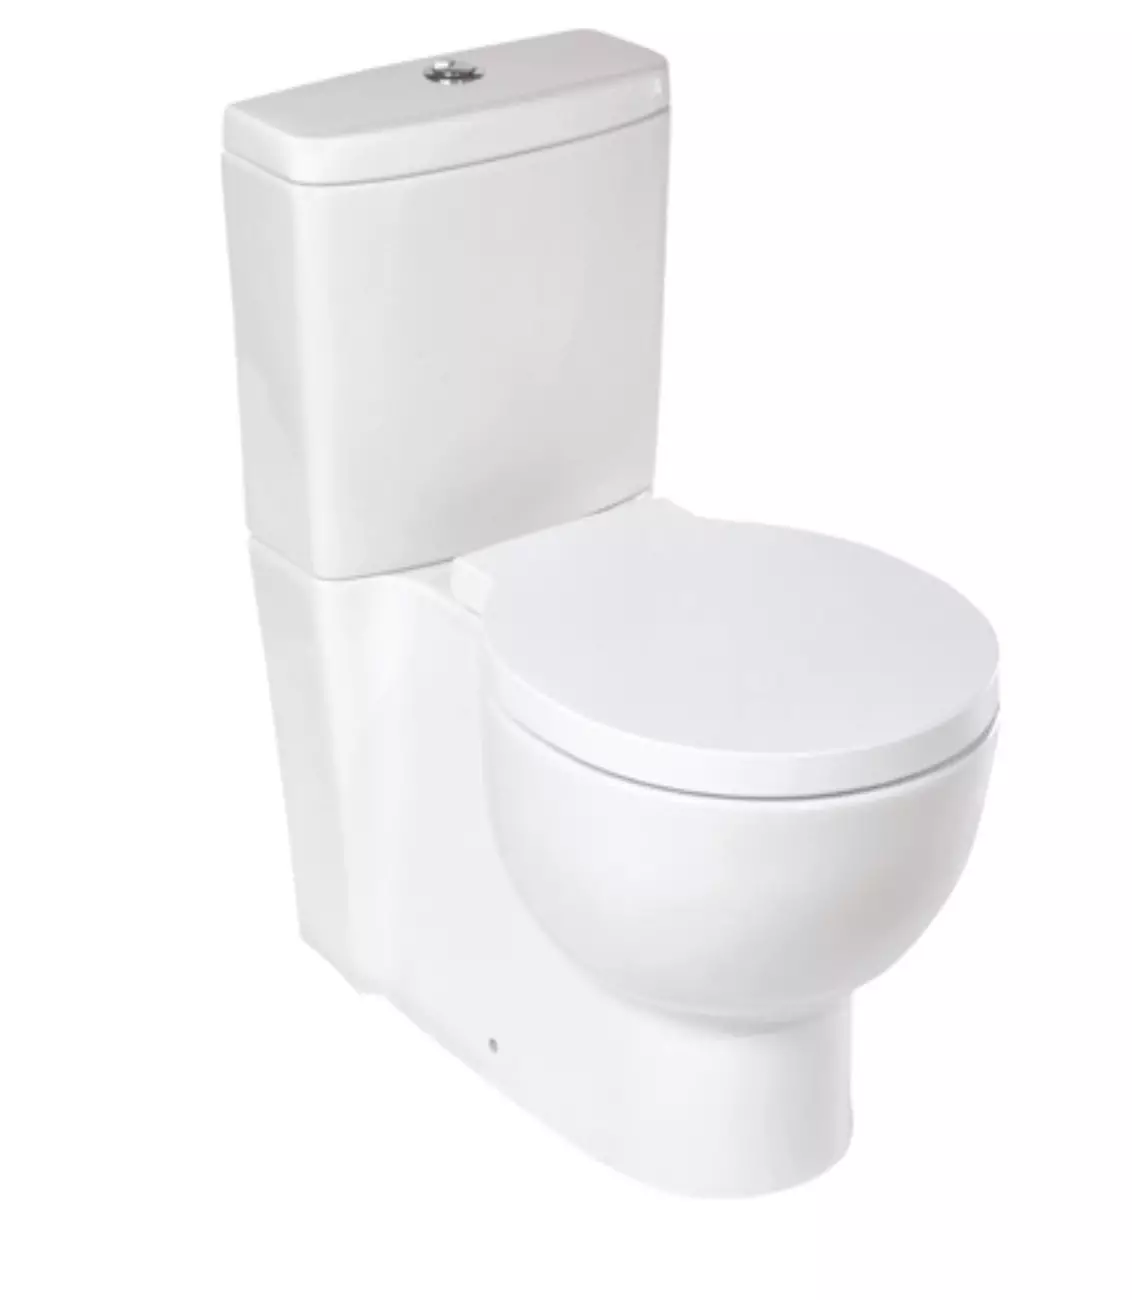 Bearless floor toilet: What models without rim is better? Choosing a toilet bowl with a tank and without it, from porcelain or faience. Rating 10533_23